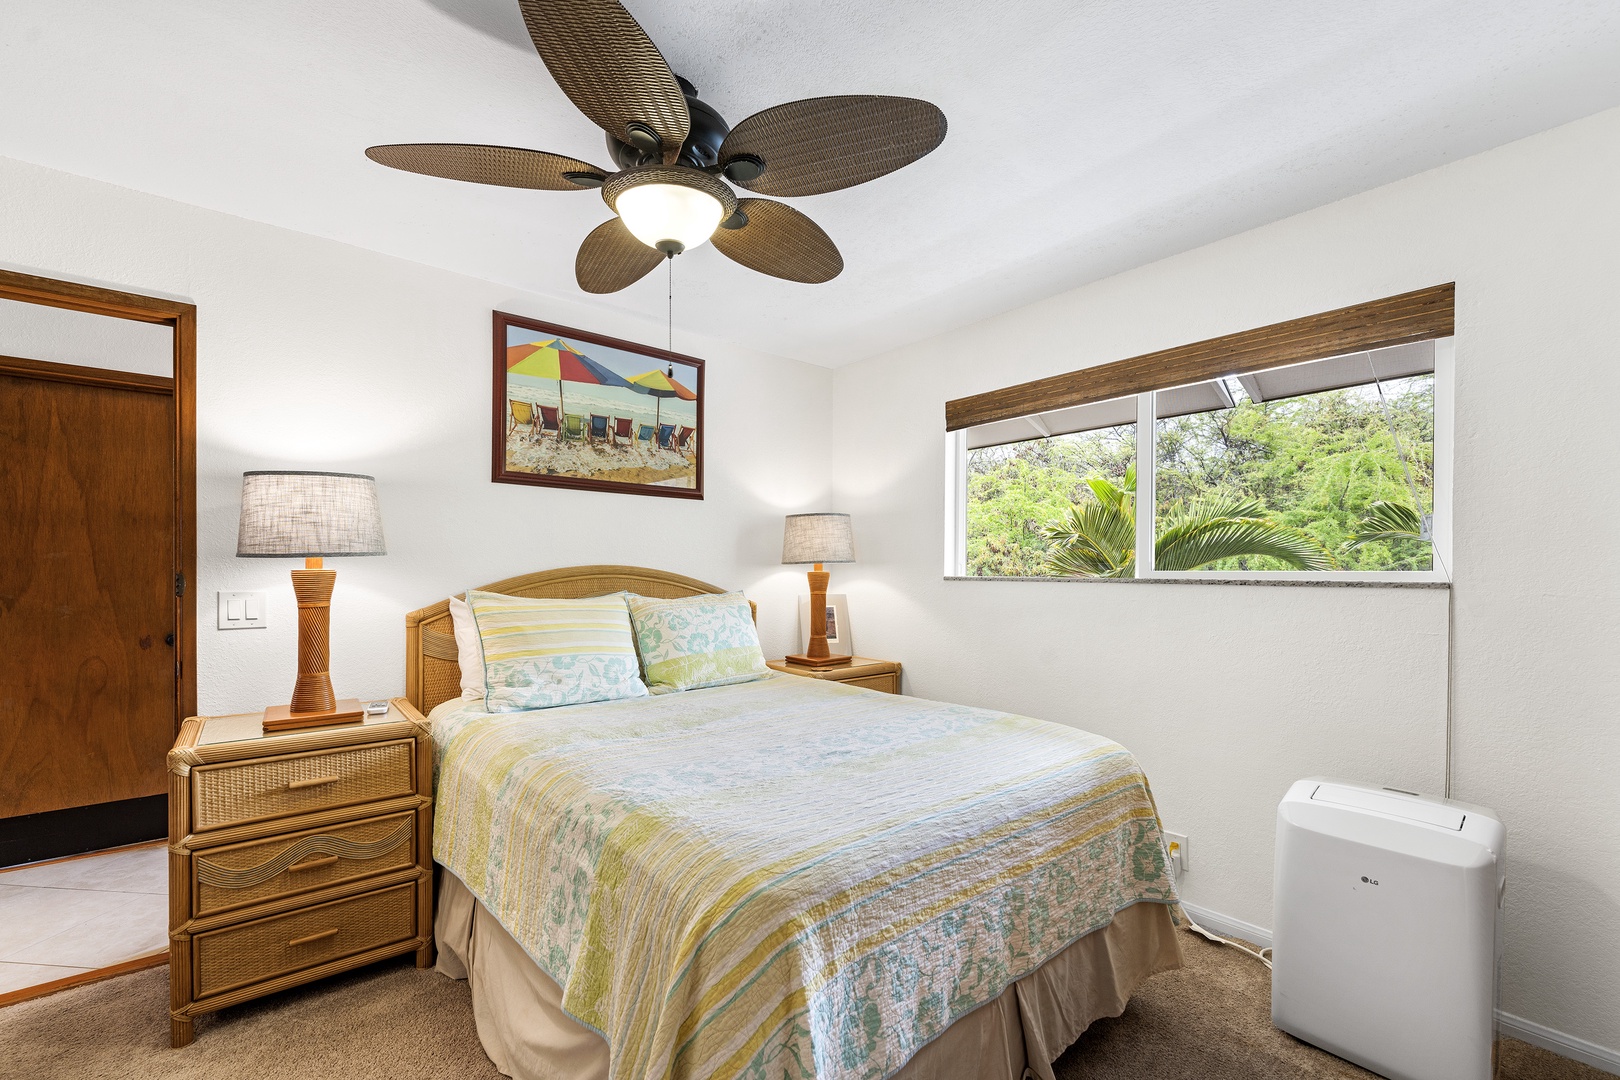 Kailua Kona Vacation Rentals, Kahalu'u Reef 203 - Primary bedroom equipped with portable A/C and Queen sized bed